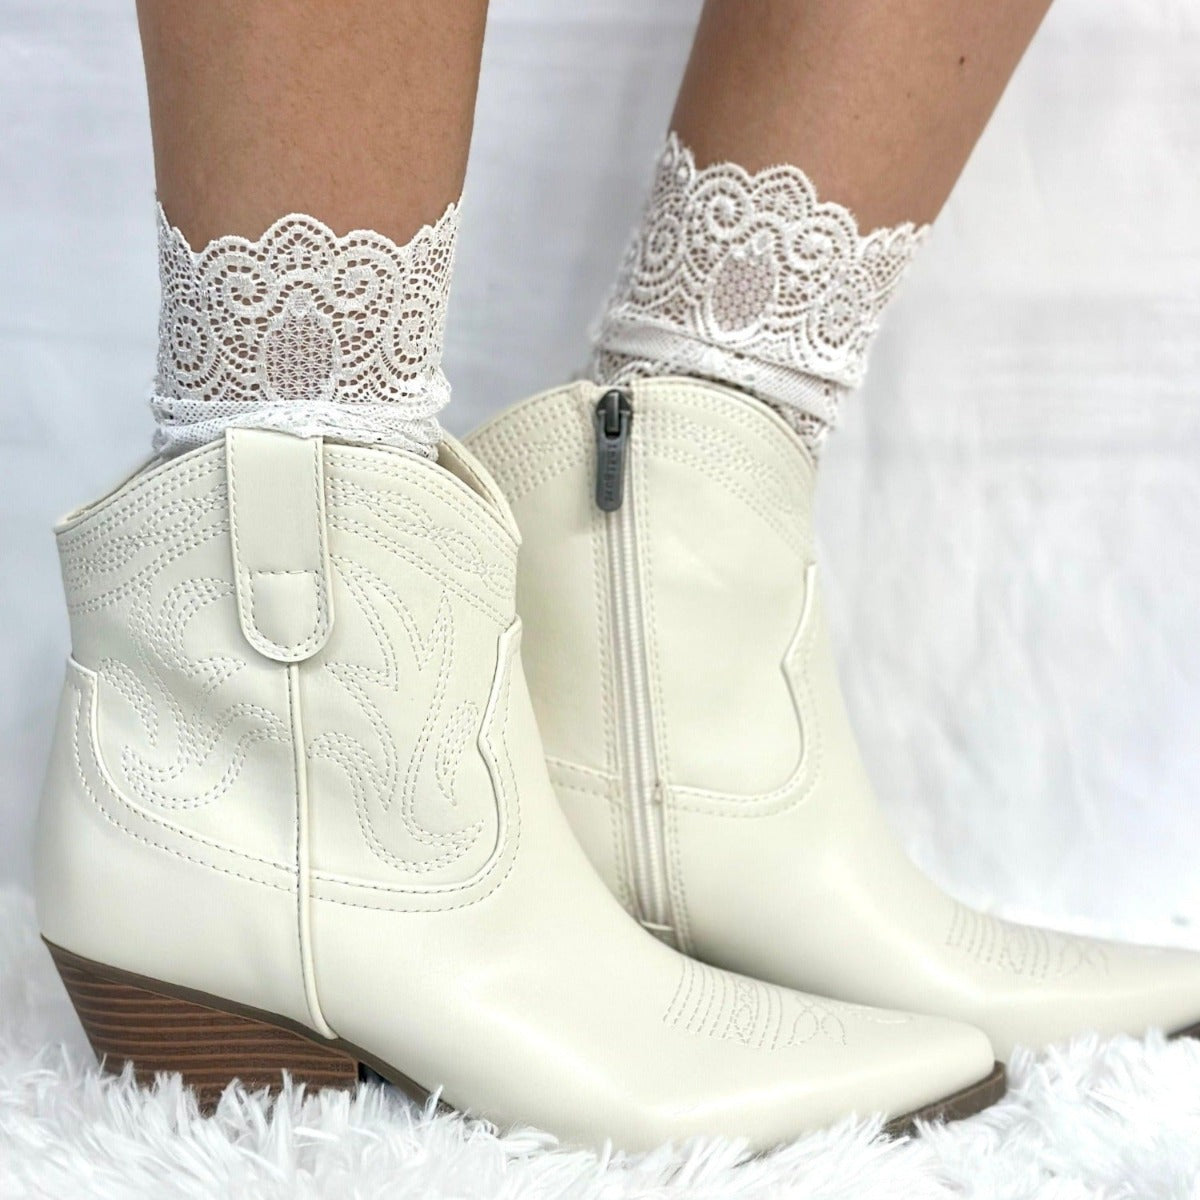 allover lace socks for cowgirl boots - cute hosiery, ladies socks lace trim, lace socks heels